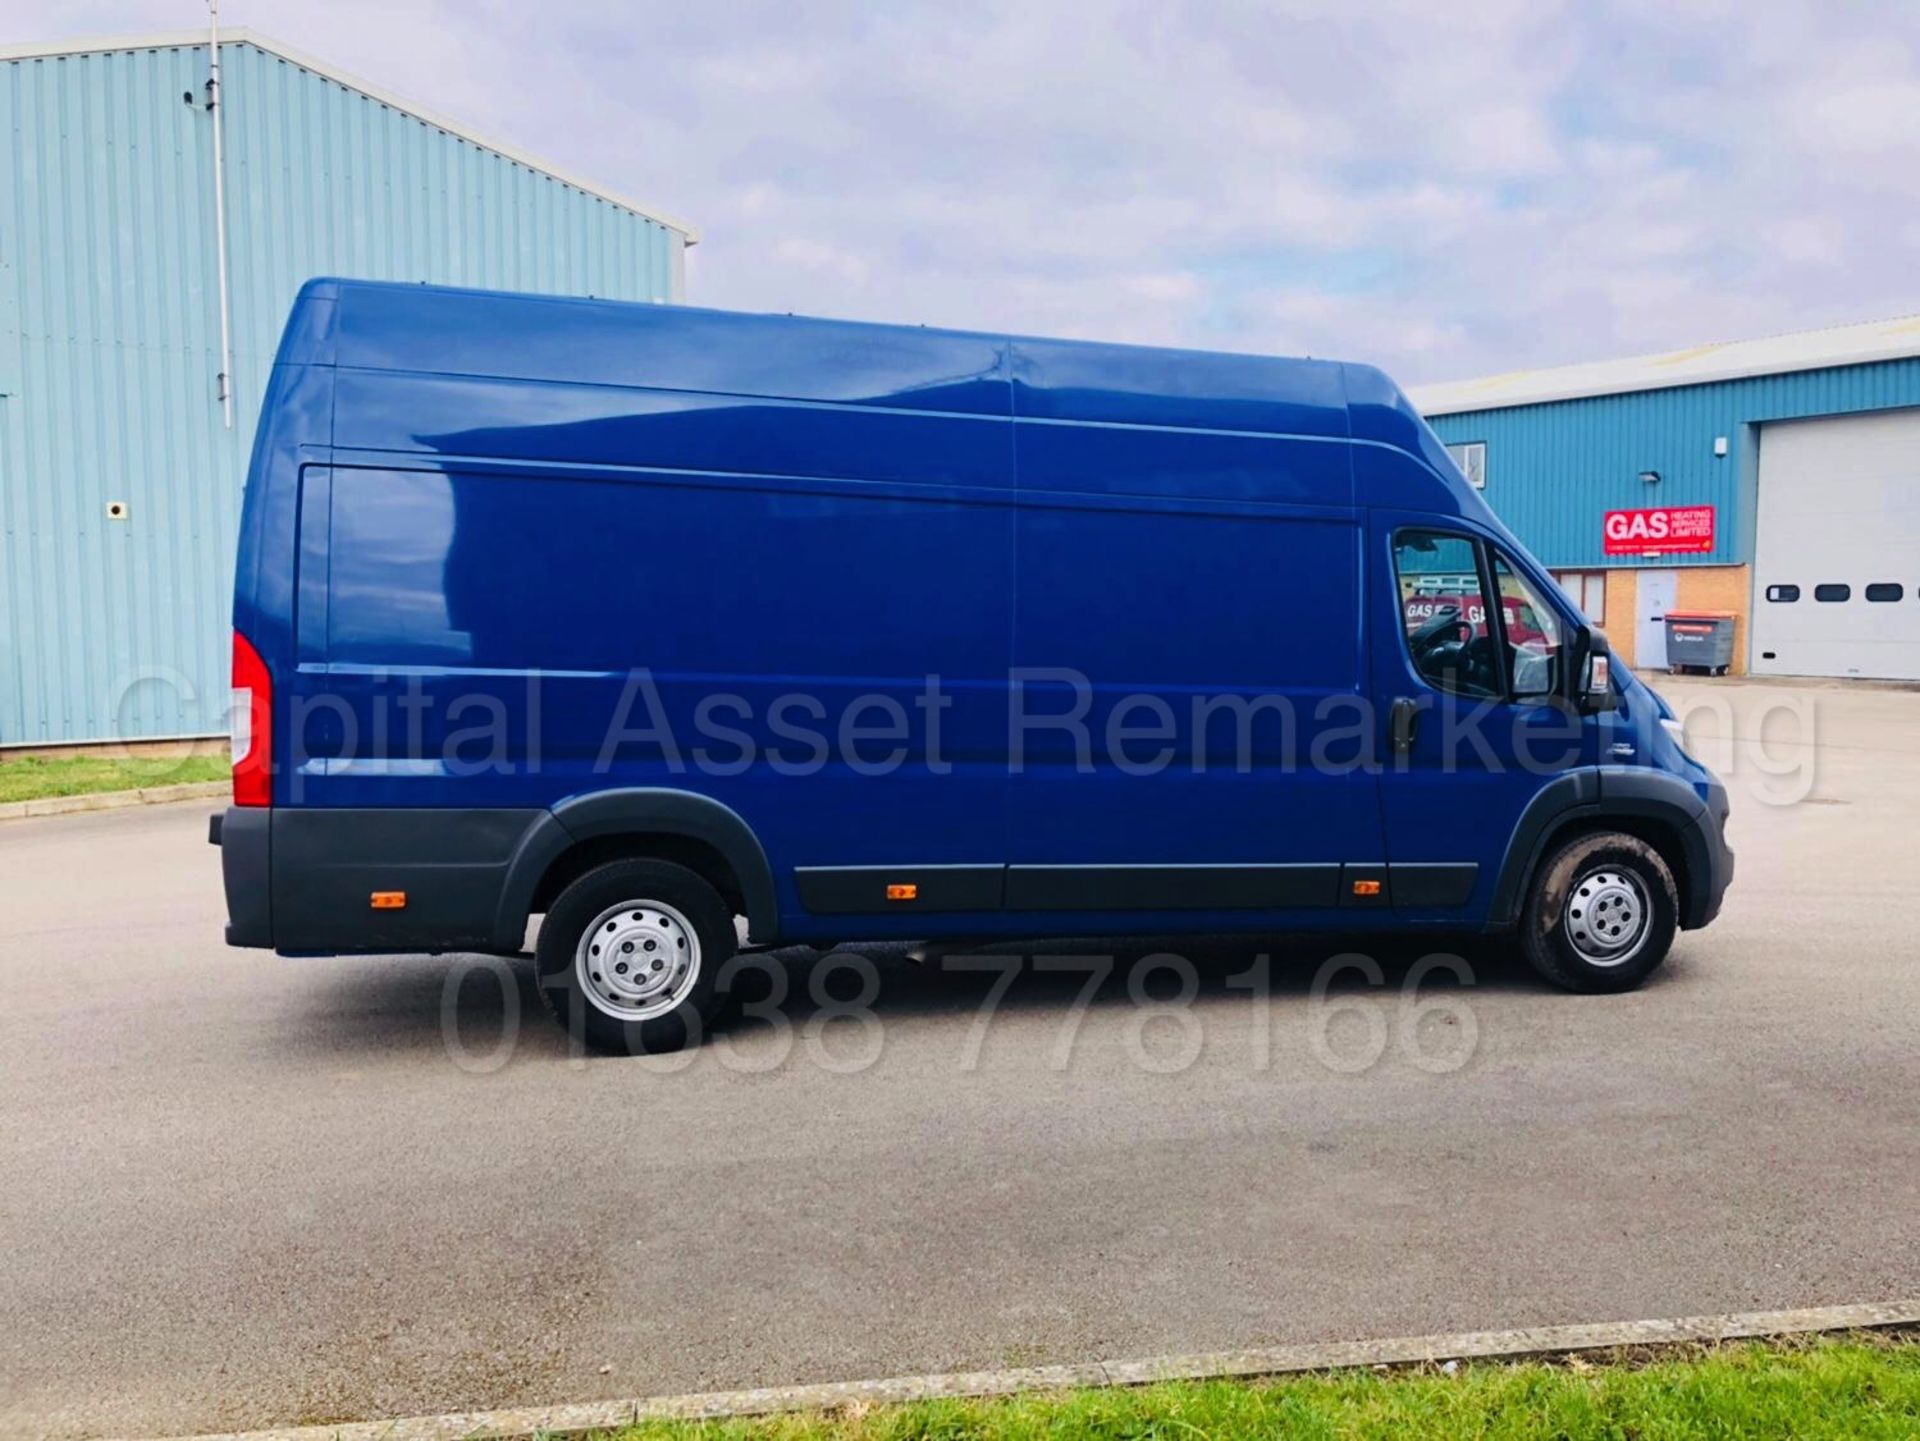 FIAT DUCATO 'XLWB HI-ROOF - MAXI' (2016 MODEL) '2.3 DIESEL - 130 BHP - 6 SPEED' (1 OWNER FROM NEW) - Image 12 of 32